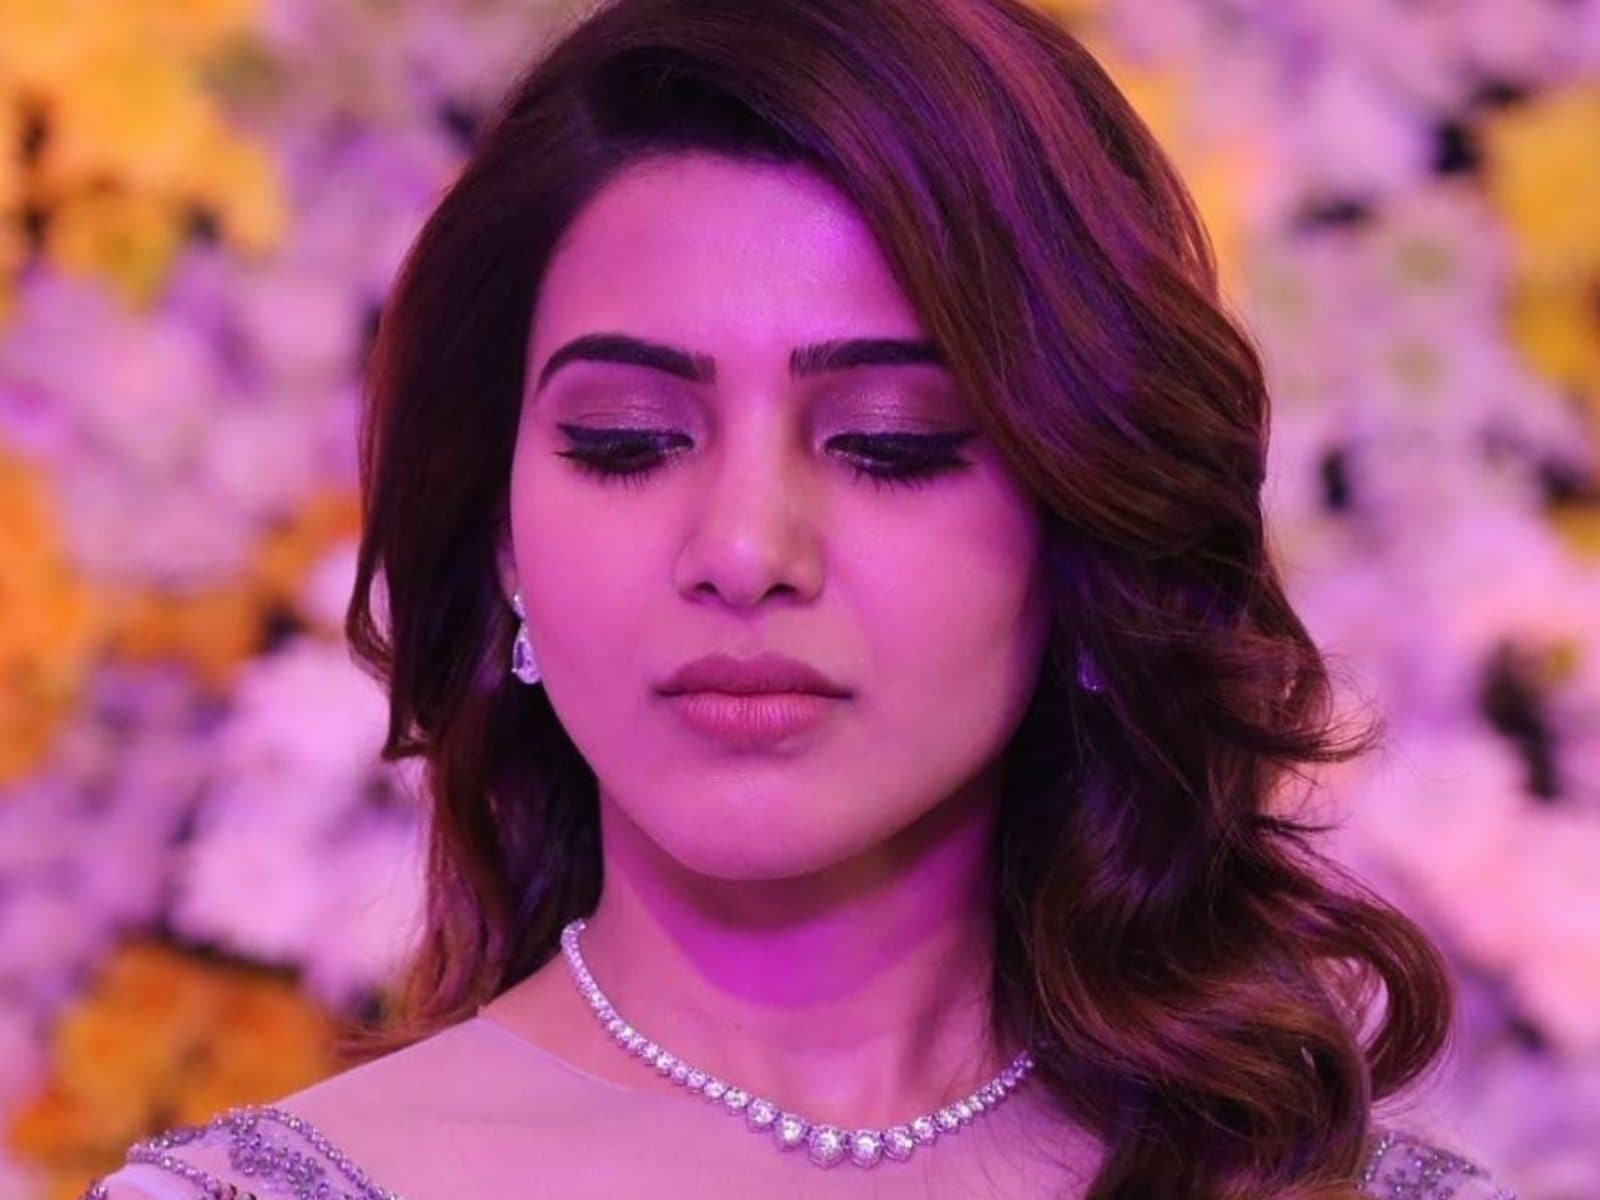 Samantha Ruth Prabhu deletes most of her pictures with Naga